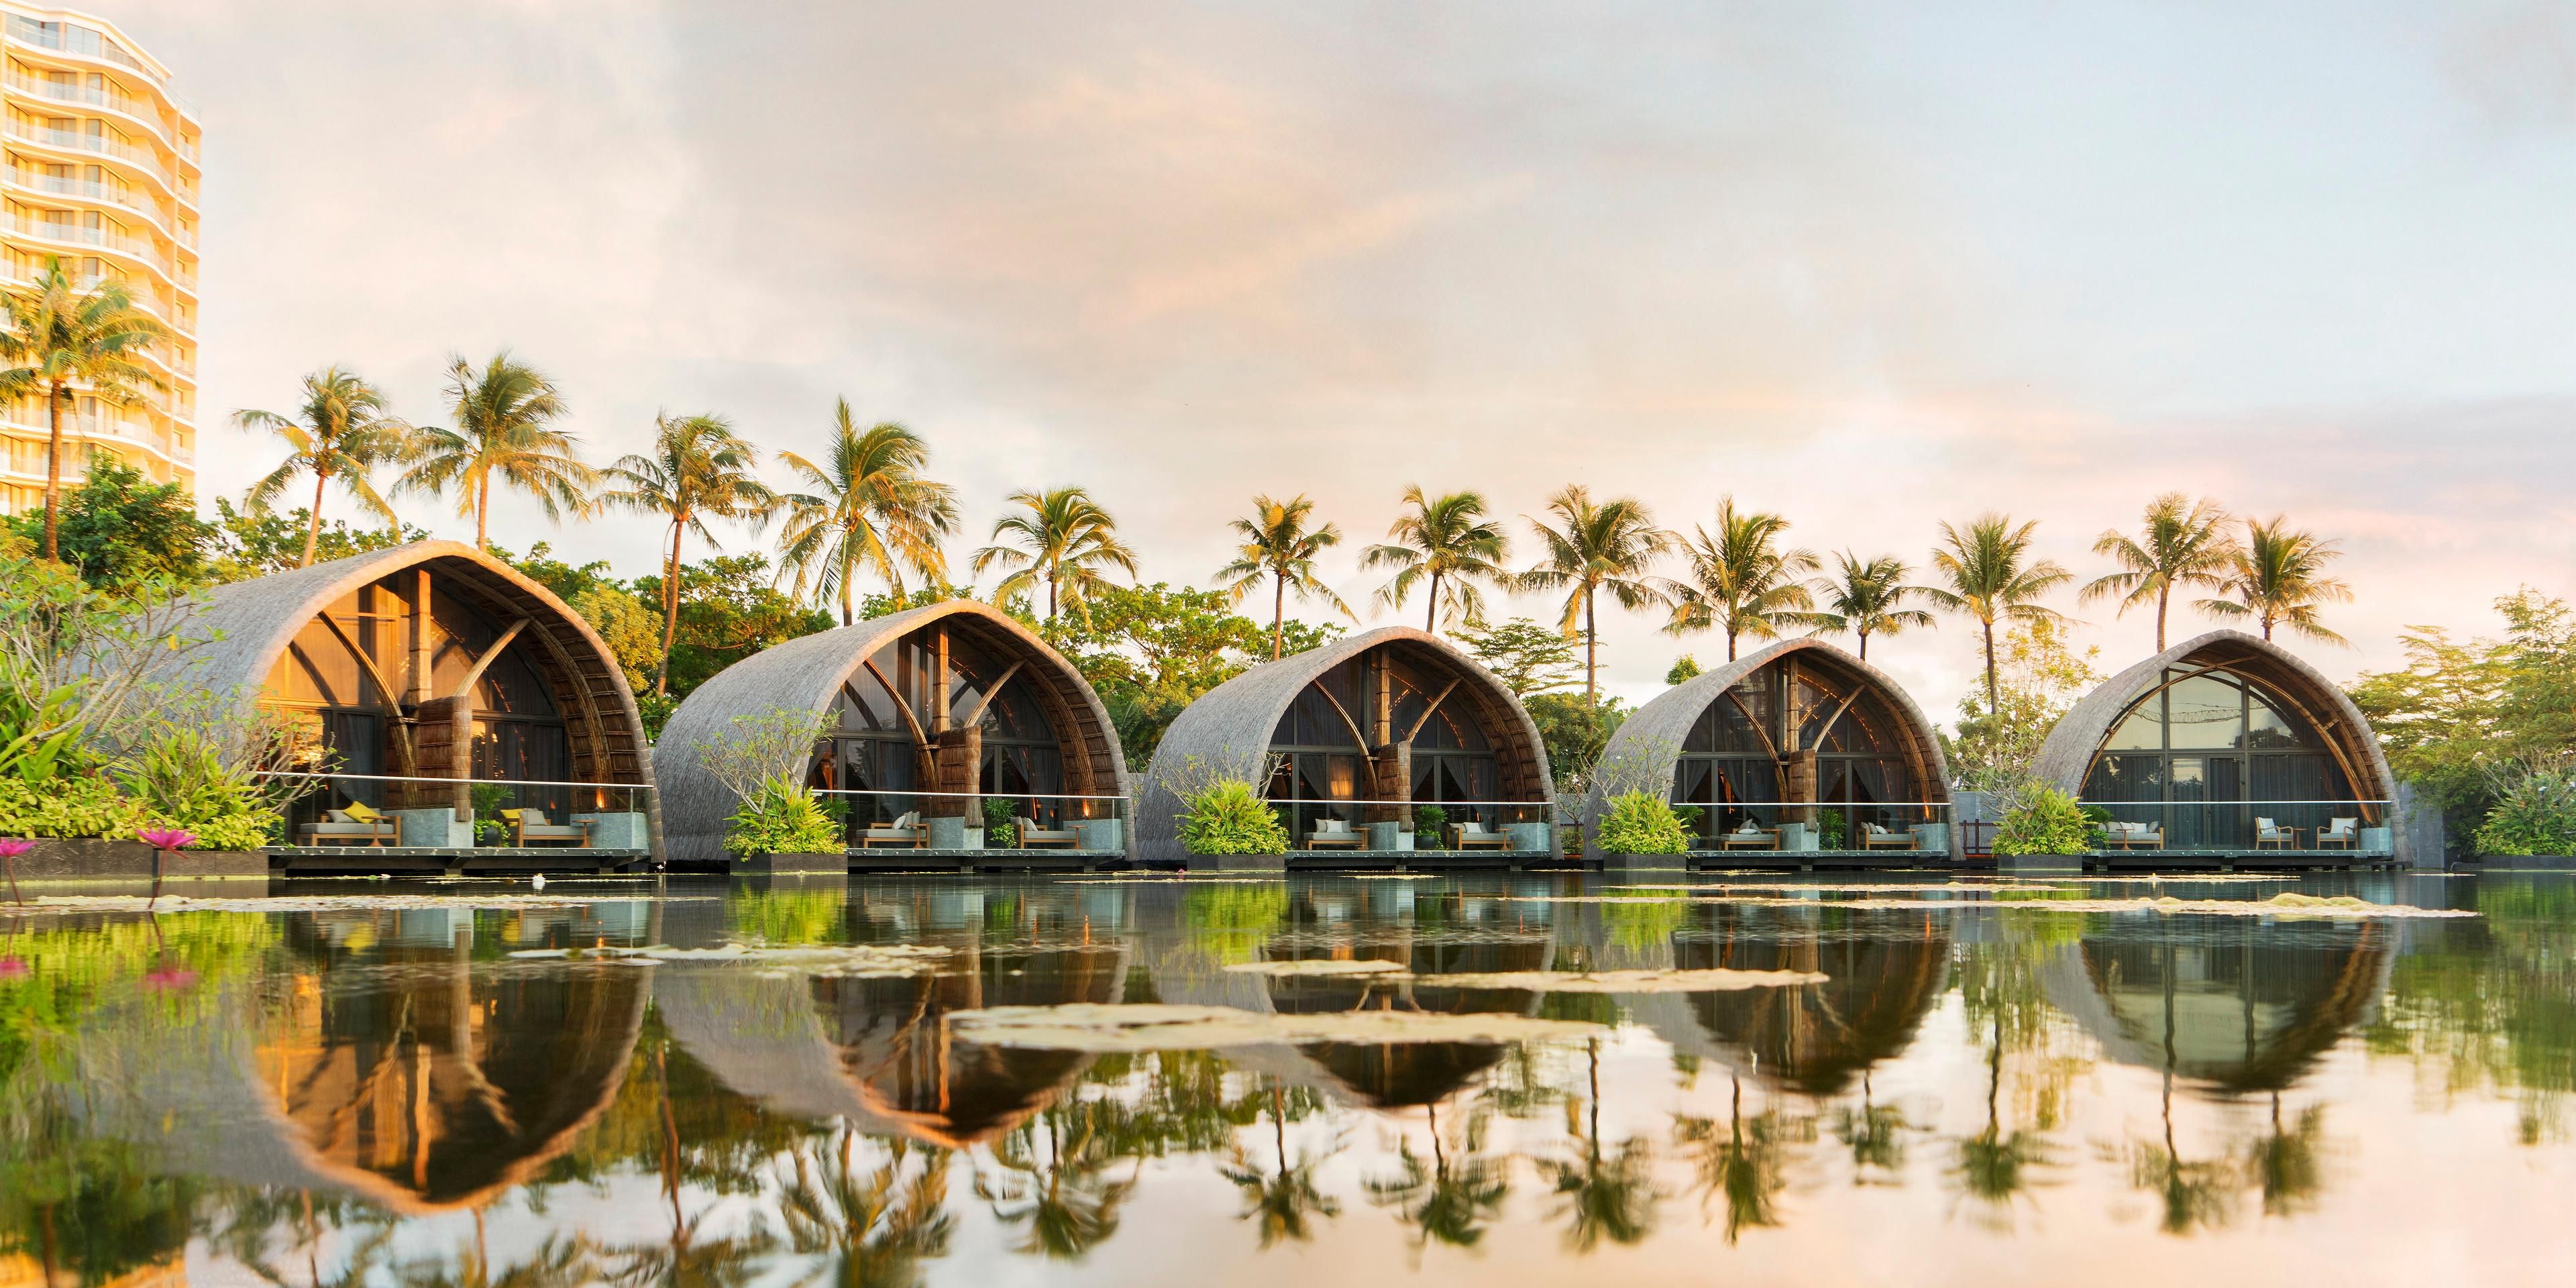 With beautifully appointed treatment suites that appear to ‘float’ on the lush Lotus Lagoon, HARNN Heritage Spa is a place of natural serenity offering guests a unique and luxurious wellness experience inspired through the long tradition of healing Asian therapies.